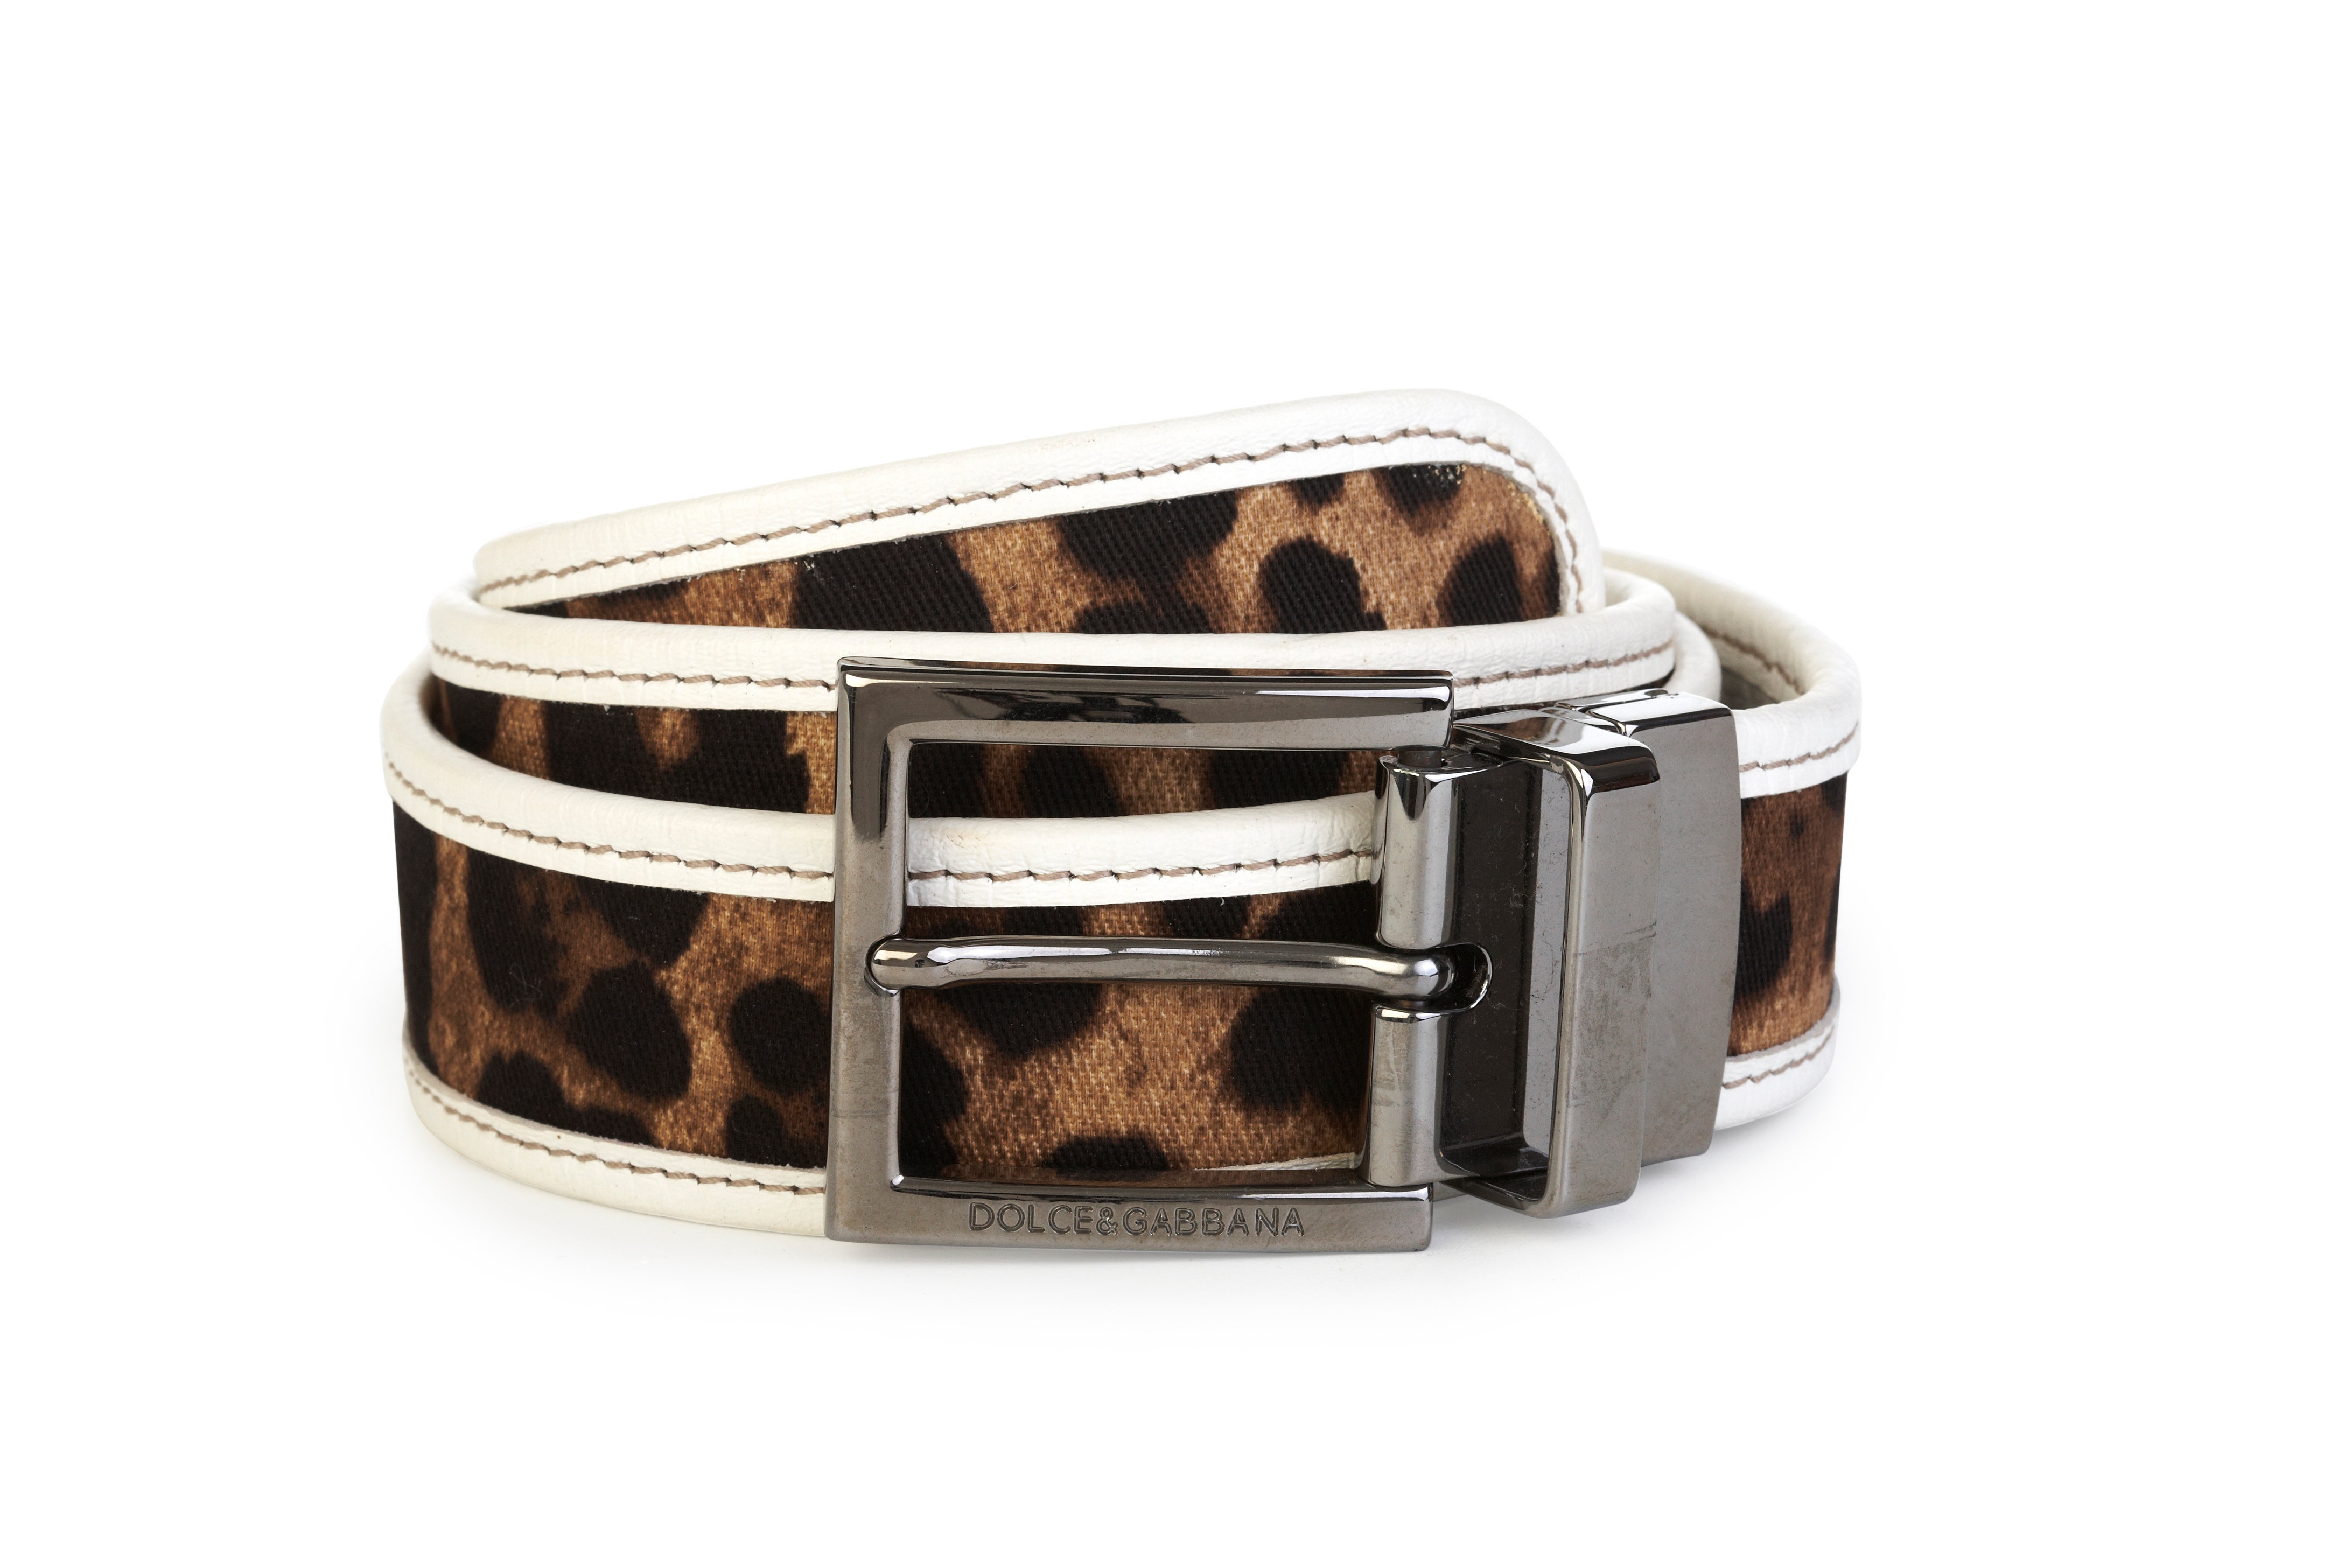 Dolce & Gabbana white leather belt with animal print inlay | Curate8